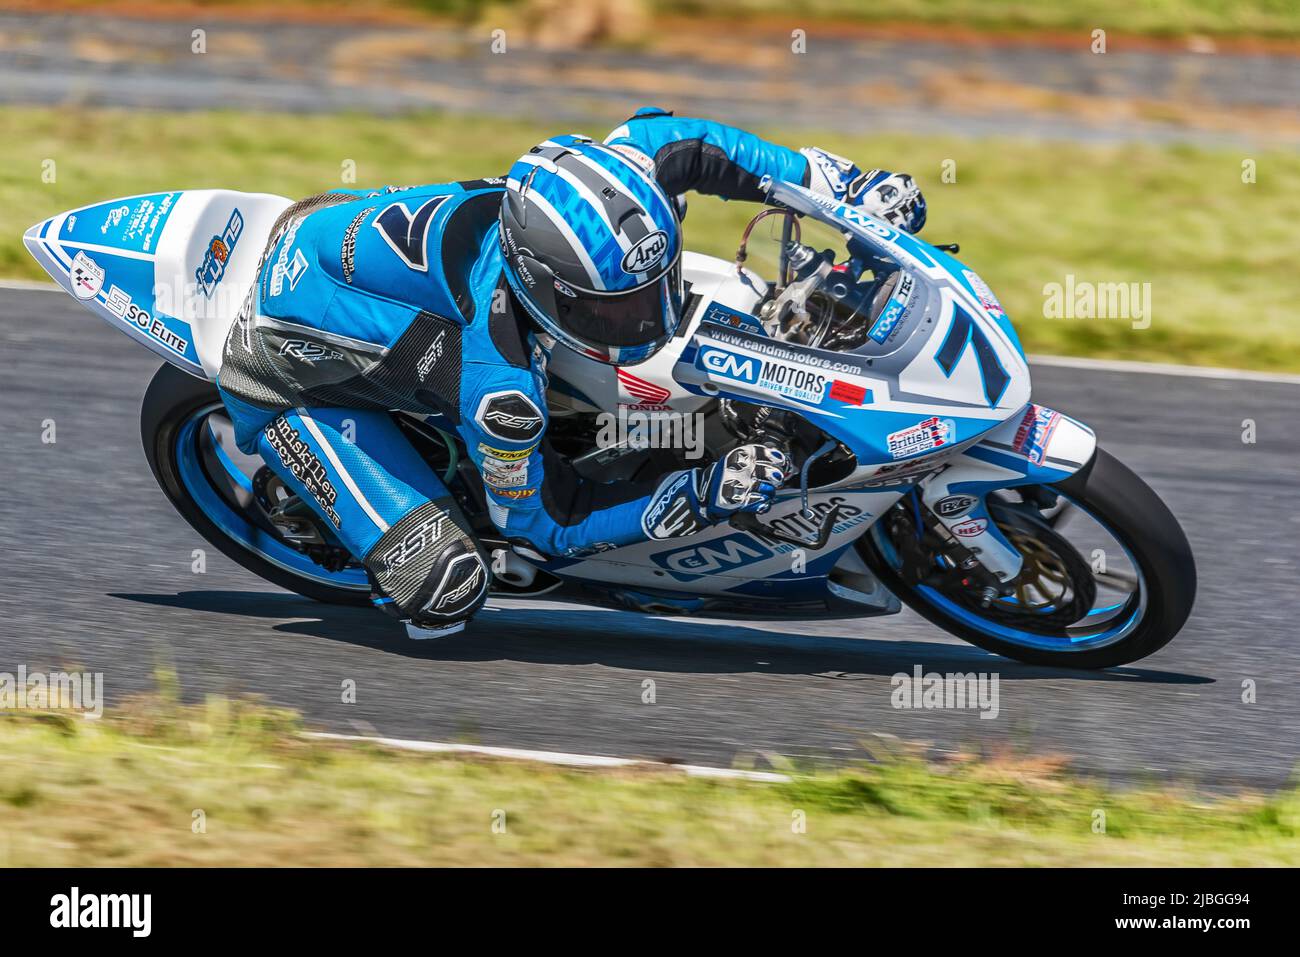 Motorcycle racer in action at Kirkistown Race Circuit, Northern Ireland Stock Photo